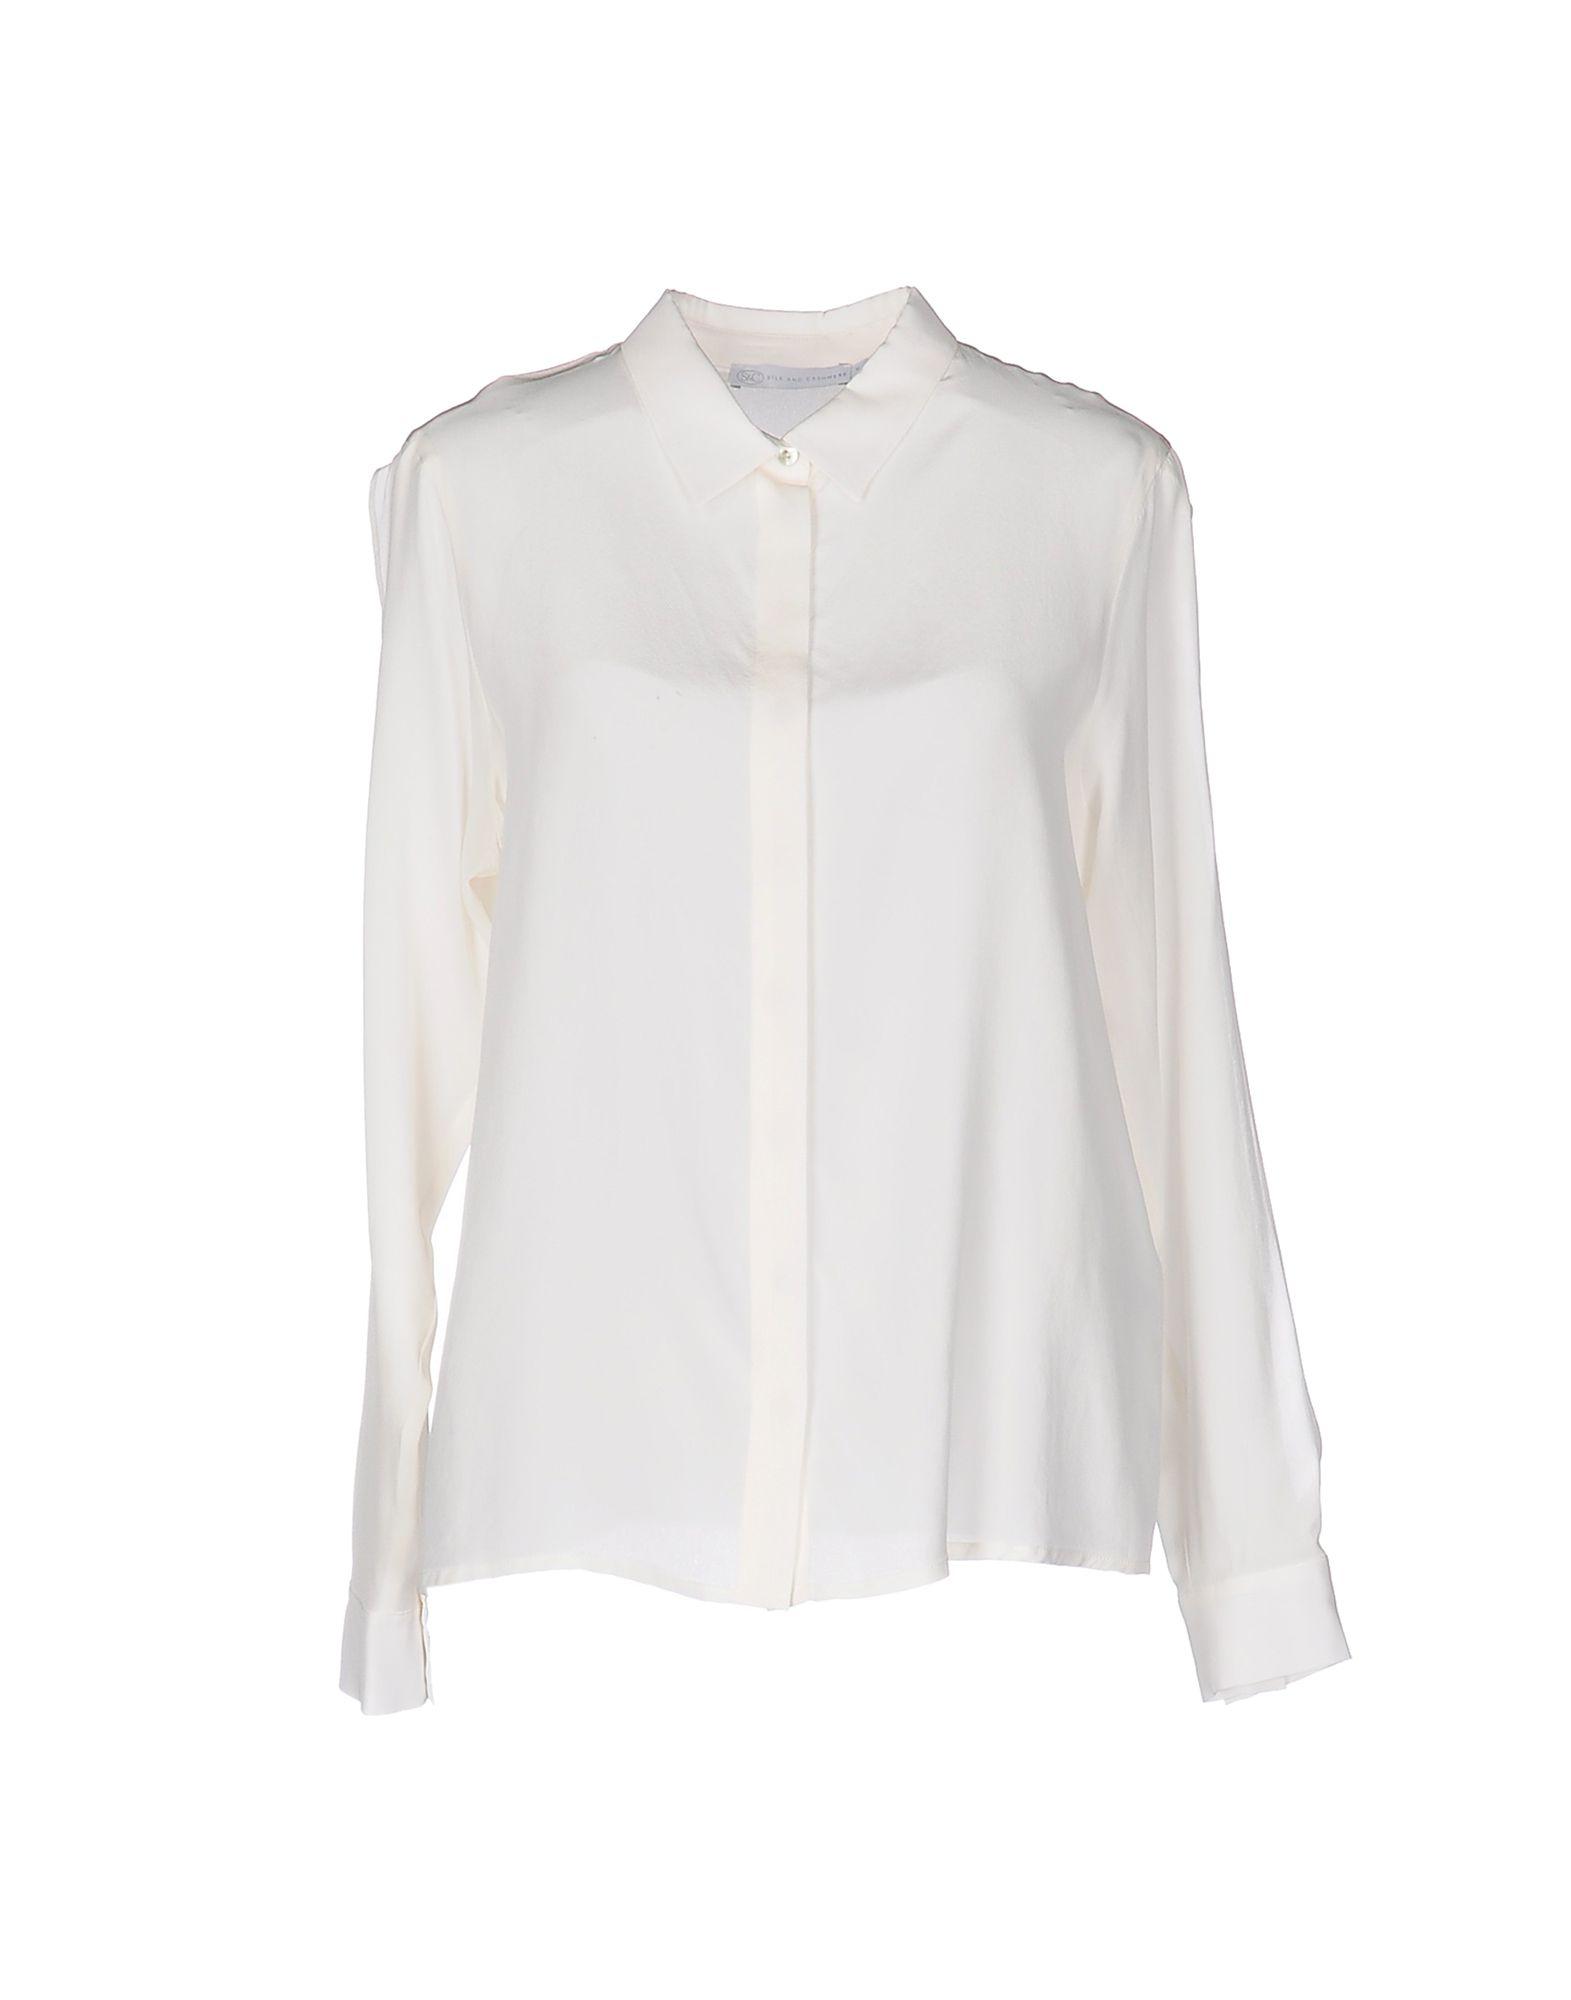 Lyst - Silk And Cashmere Shirt in White